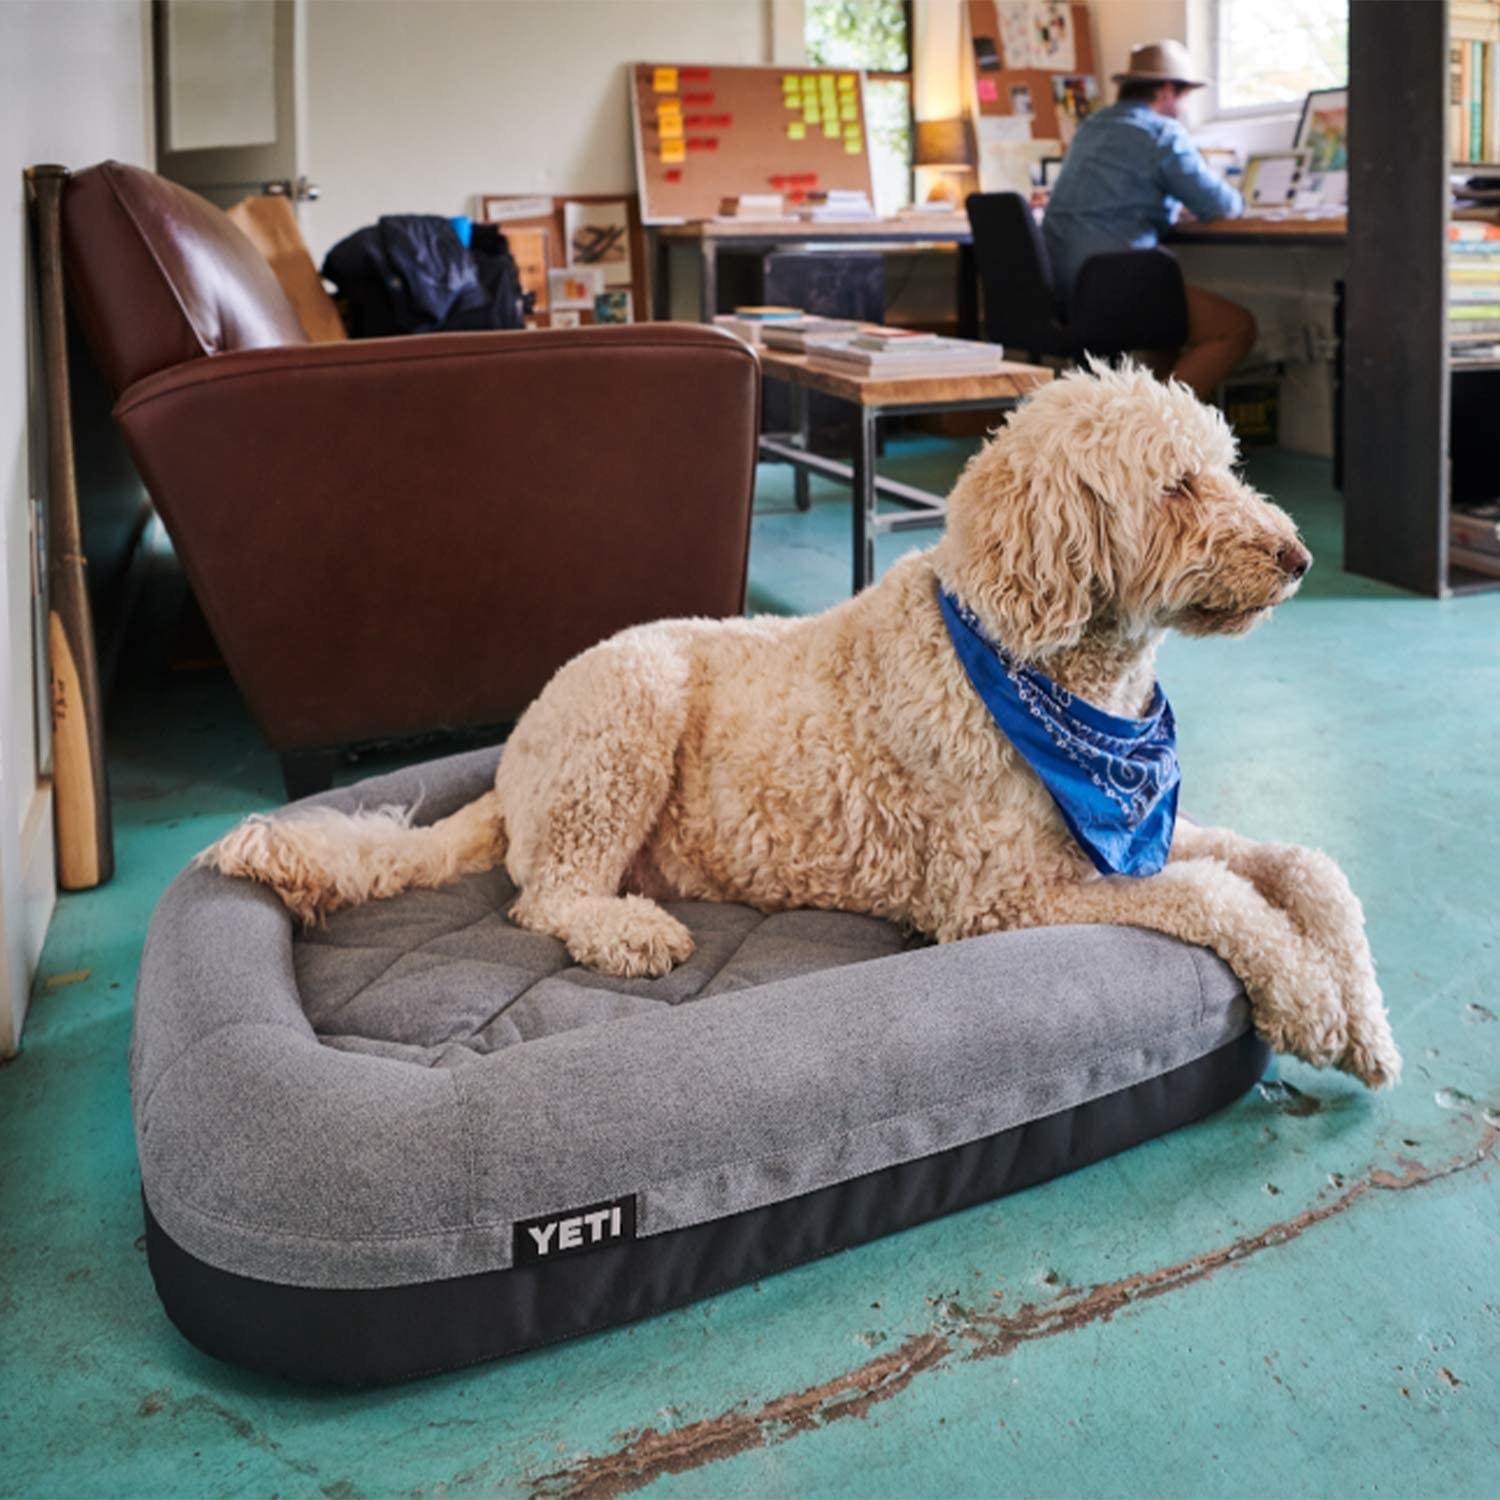 A dog on the dog bed in an office